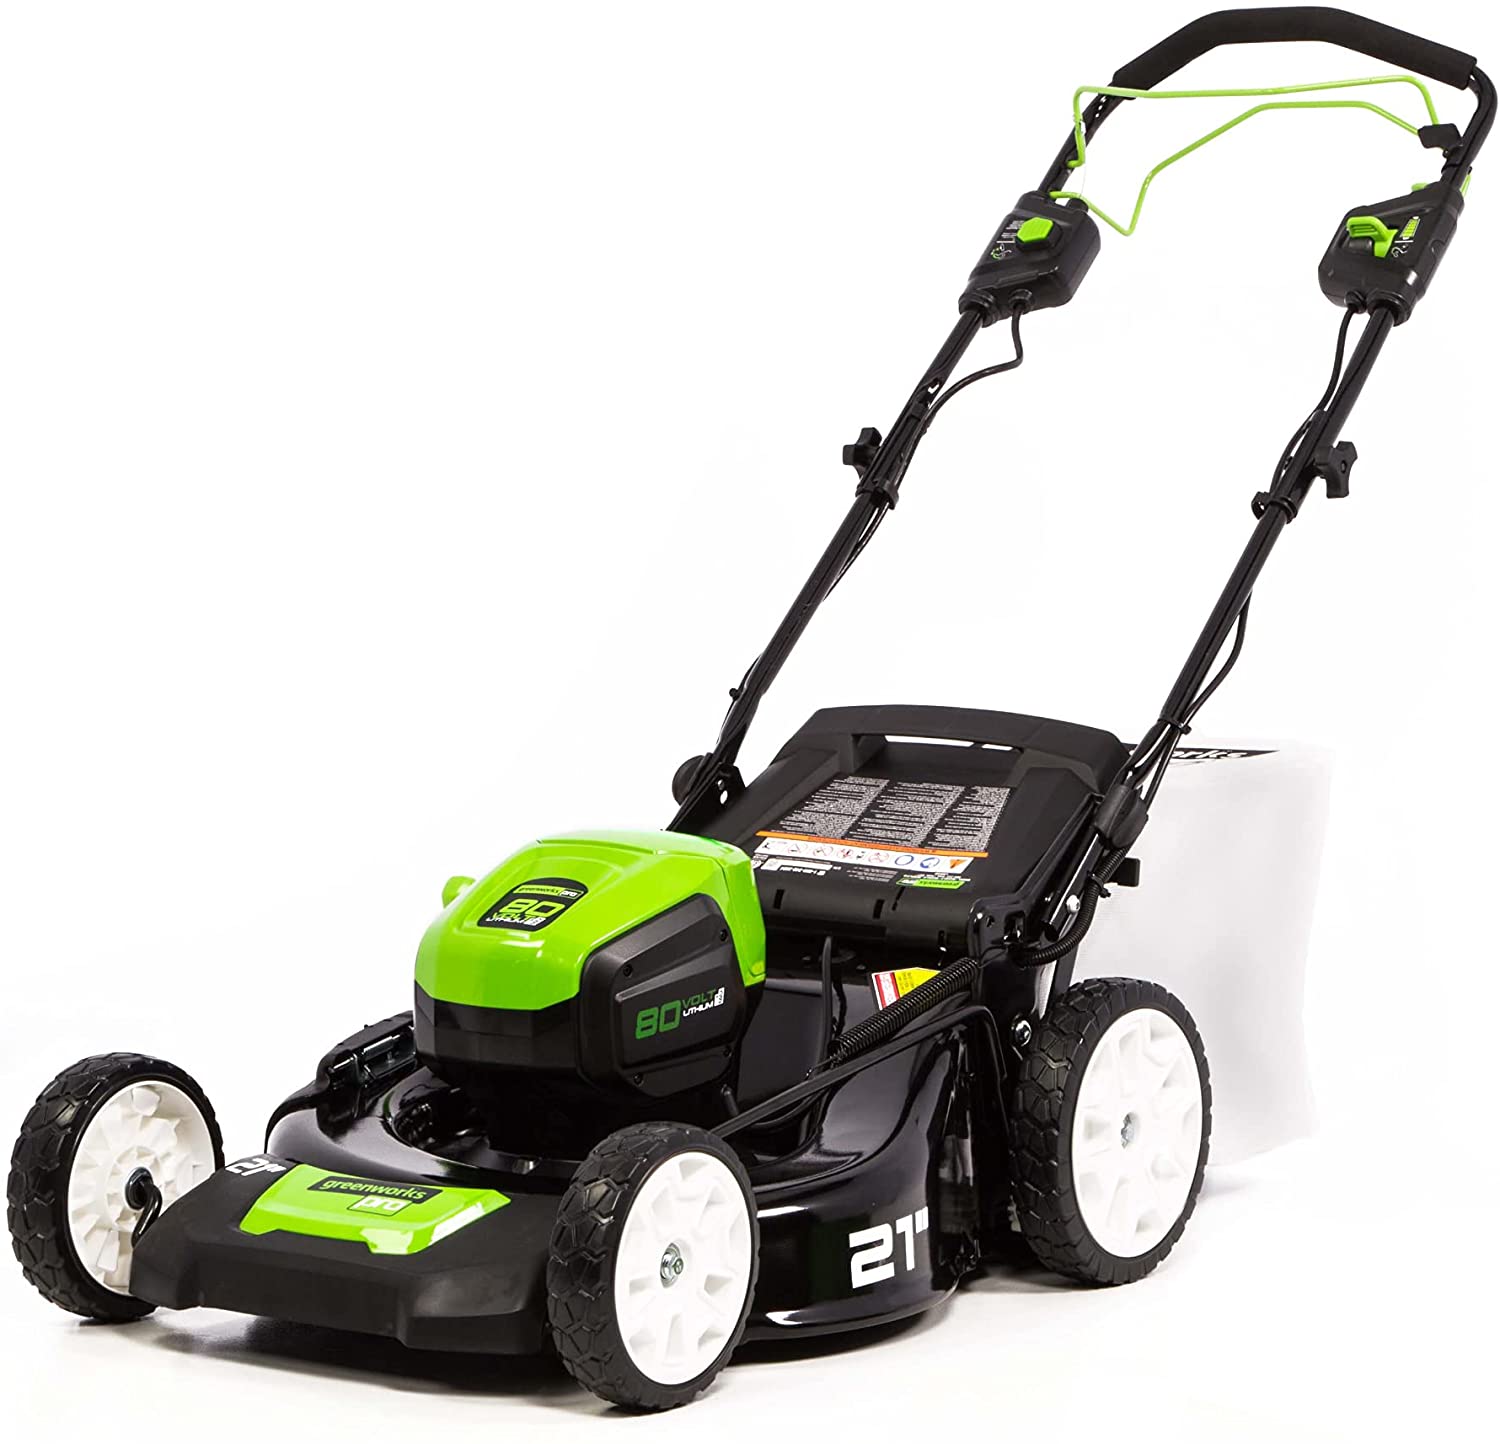 21" Greenworks Pro 80V Self-Propelled Cordless Lawn Mower (Tool Only) $271 + Free Shipping